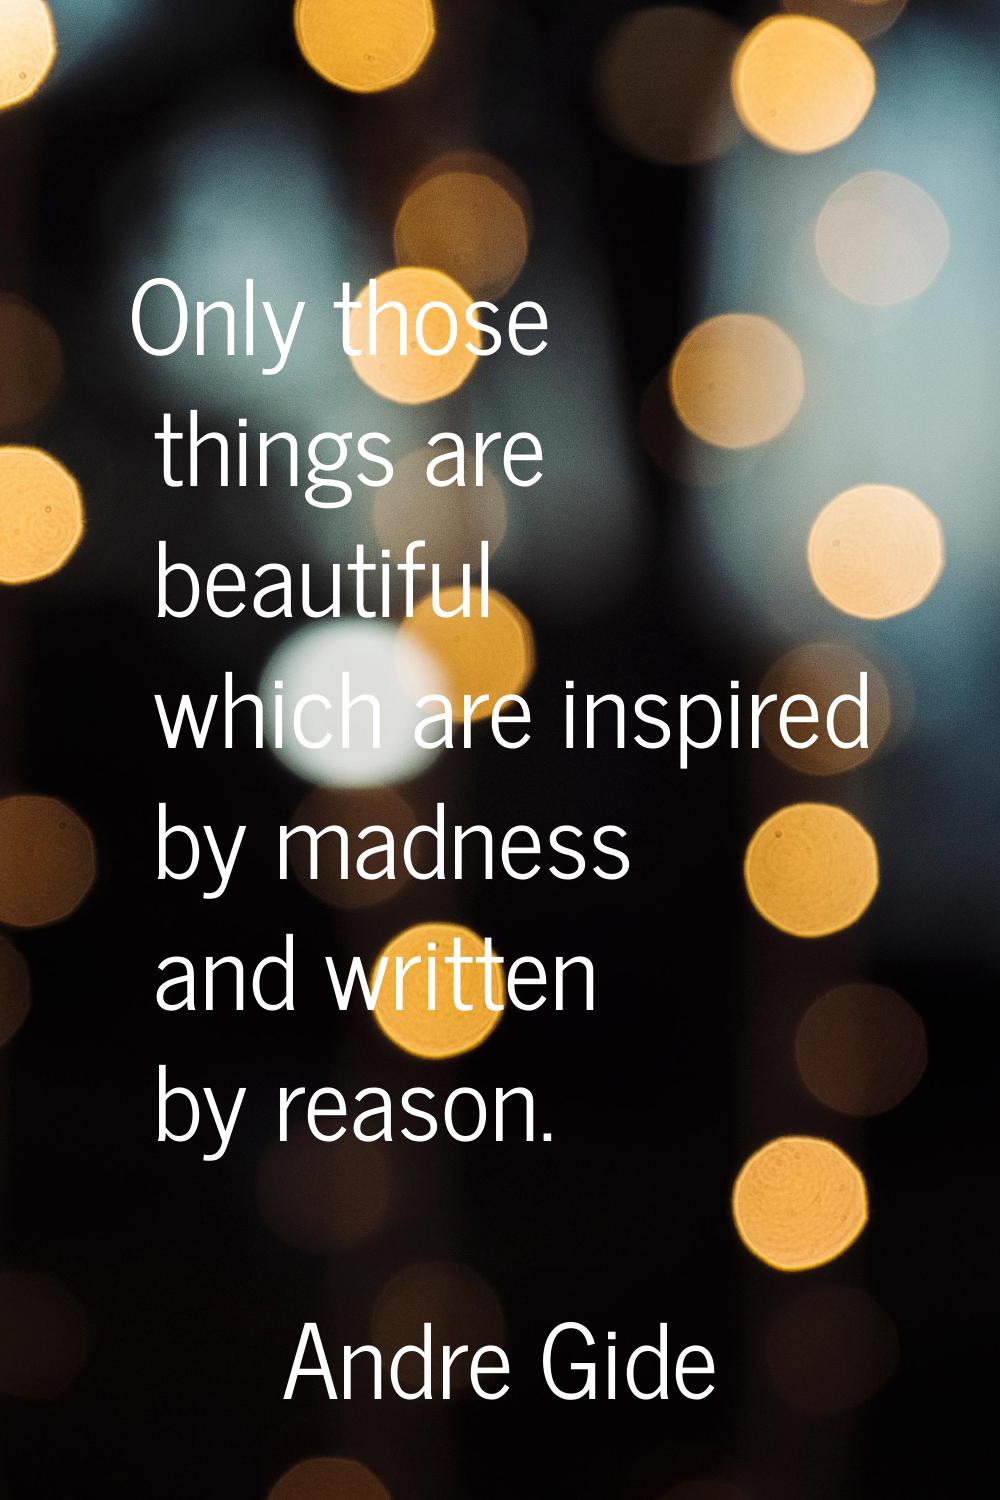 Only those things are beautiful which are inspired by madness and written by reason.